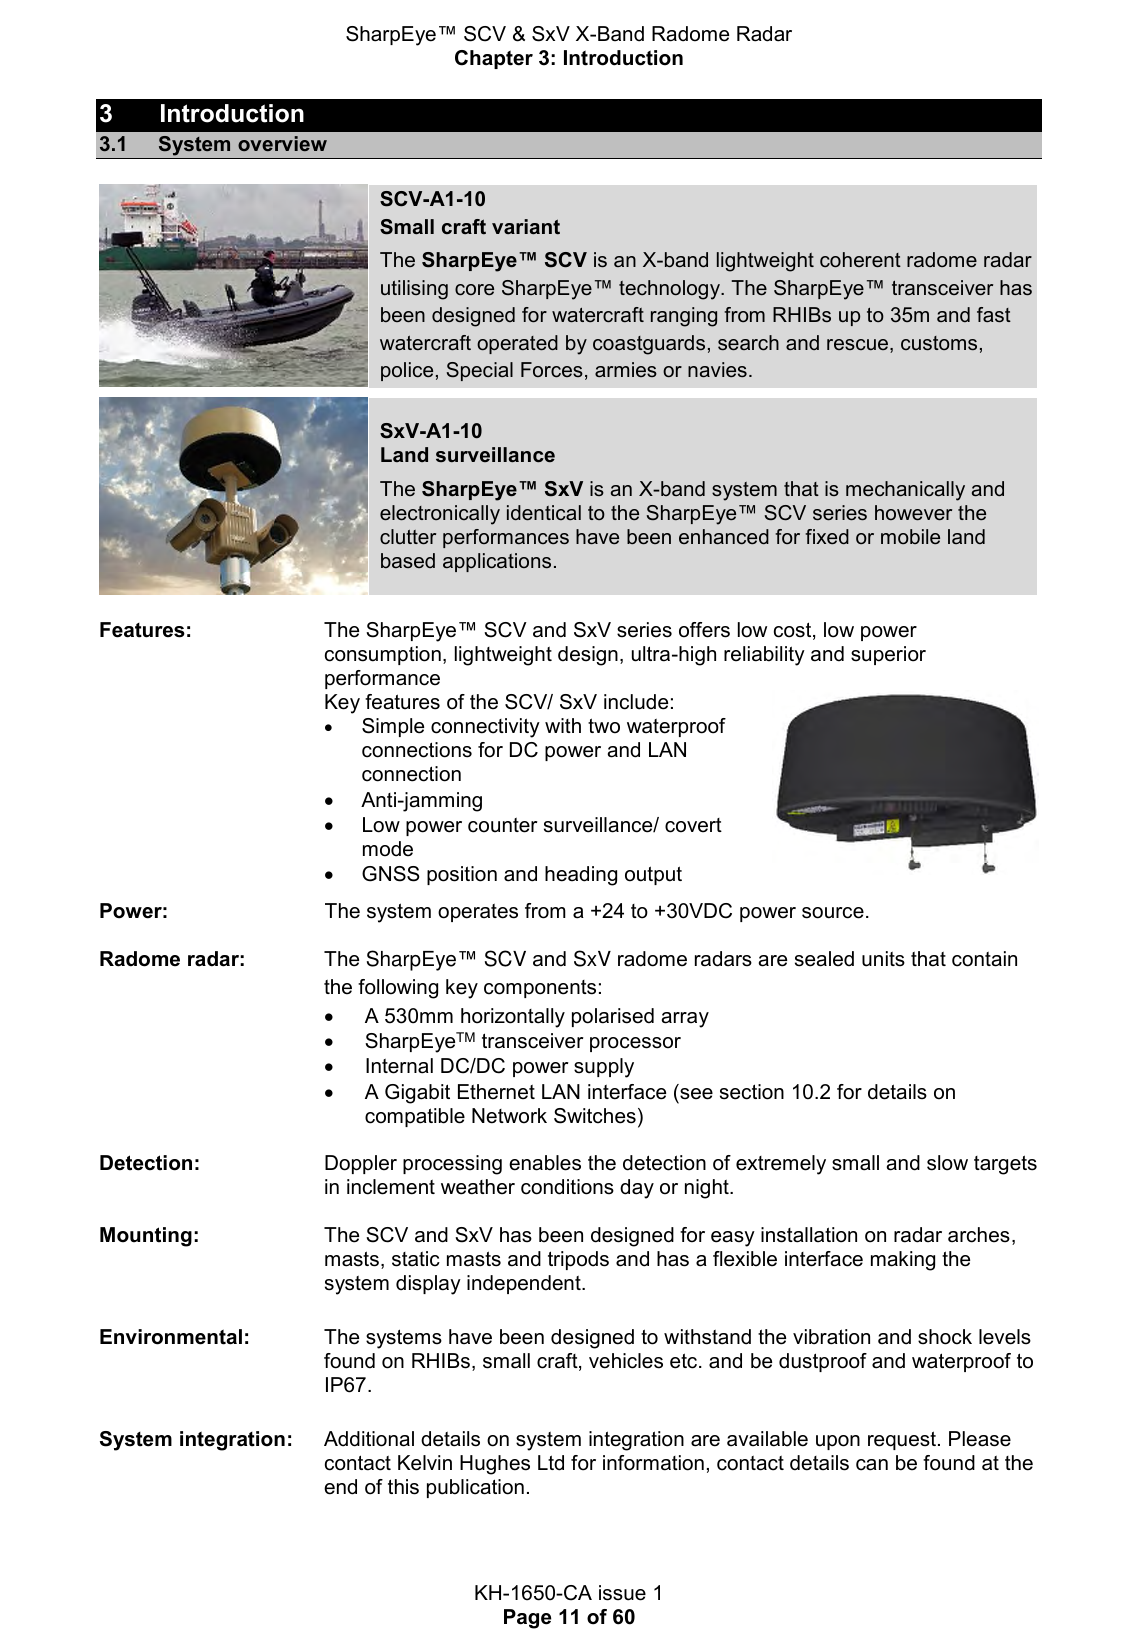 SharpEye™ SCV &amp; SxV X-Band Radome Radar Chapter 3: Introduction  KH-1650-CA issue 1 Page 11 of 60 3  Introduction 3.1  System overview    SCV-A1-10 Small craft variant  The SharpEye™ SCV is an X-band lightweight coherent radome radar utilising core SharpEye™ technology. The SharpEye™ transceiver has been designed for watercraft ranging from RHIBs up to 35m and fast watercraft operated by coastguards, search and rescue, customs, police, Special Forces, armies or navies.    SxV-A1-10 Land surveillance  The SharpEye™ SxV is an X-band system that is mechanically and electronically identical to the SharpEye™ SCV series however the clutter performances have been enhanced for fixed or mobile land based applications.  Features:                       The SharpEye™ SCV and SxV series offers low cost, low power consumption, lightweight design, ultra-high reliability and superior performance Key features of the SCV/ SxV include:   Simple connectivity with two waterproof connections for DC power and LAN connection   Anti-jamming   Low power counter surveillance/ covert mode    GNSS position and heading output   Power:                           The system operates from a +24 to +30VDC power source. Radome radar:    The SharpEye™ SCV and SxV radome radars are sealed units that contain the following key components:  A 530mm horizontally polarised array   SharpEyeTM transceiver processor   Internal DC/DC power supply   A Gigabit Ethernet LAN interface (see section 10.2 for details on compatible Network Switches)  Detection:   Doppler processing enables the detection of extremely small and slow targets in inclement weather conditions day or night.  Mounting:   The SCV and SxV has been designed for easy installation on radar arches, masts, static masts and tripods and has a flexible interface making the system display independent.   Environmental:   The systems have been designed to withstand the vibration and shock levels found on RHIBs, small craft, vehicles etc. and be dustproof and waterproof to IP67.  System integration:  Additional details on system integration are available upon request. Please contact Kelvin Hughes Ltd for information, contact details can be found at the end of this publication.    